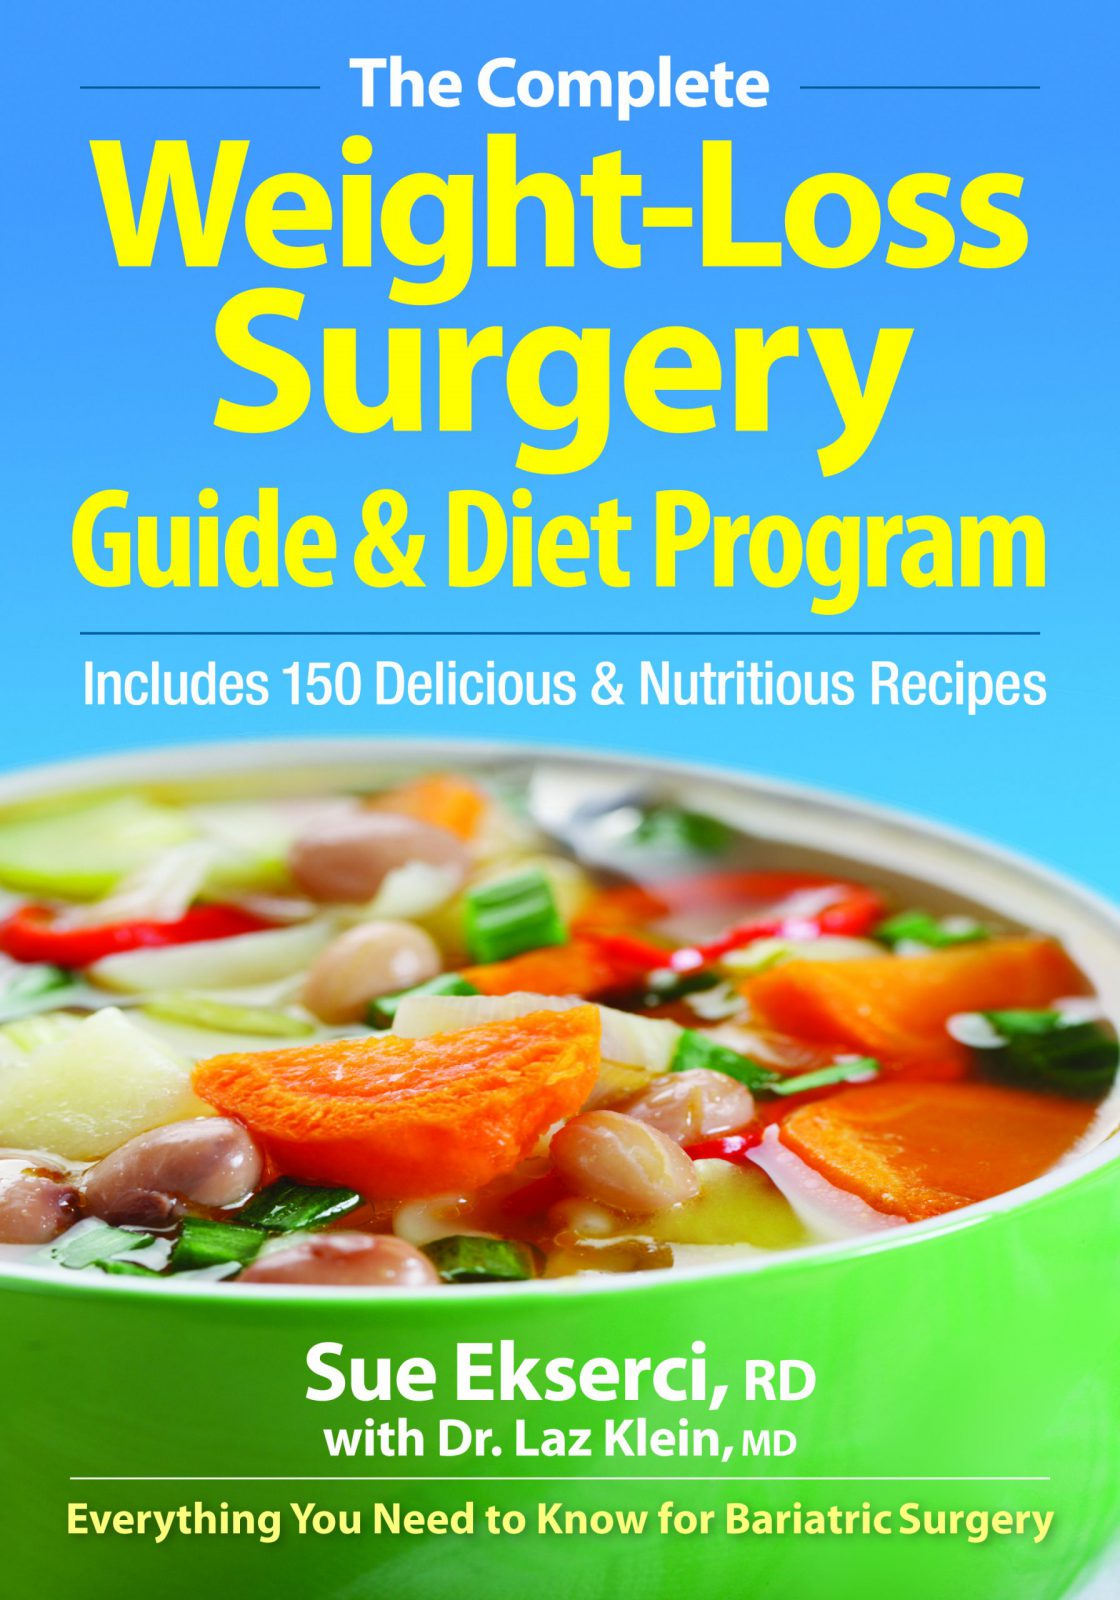 The Complete Weight-Loss Surgery Guide and Diet Program